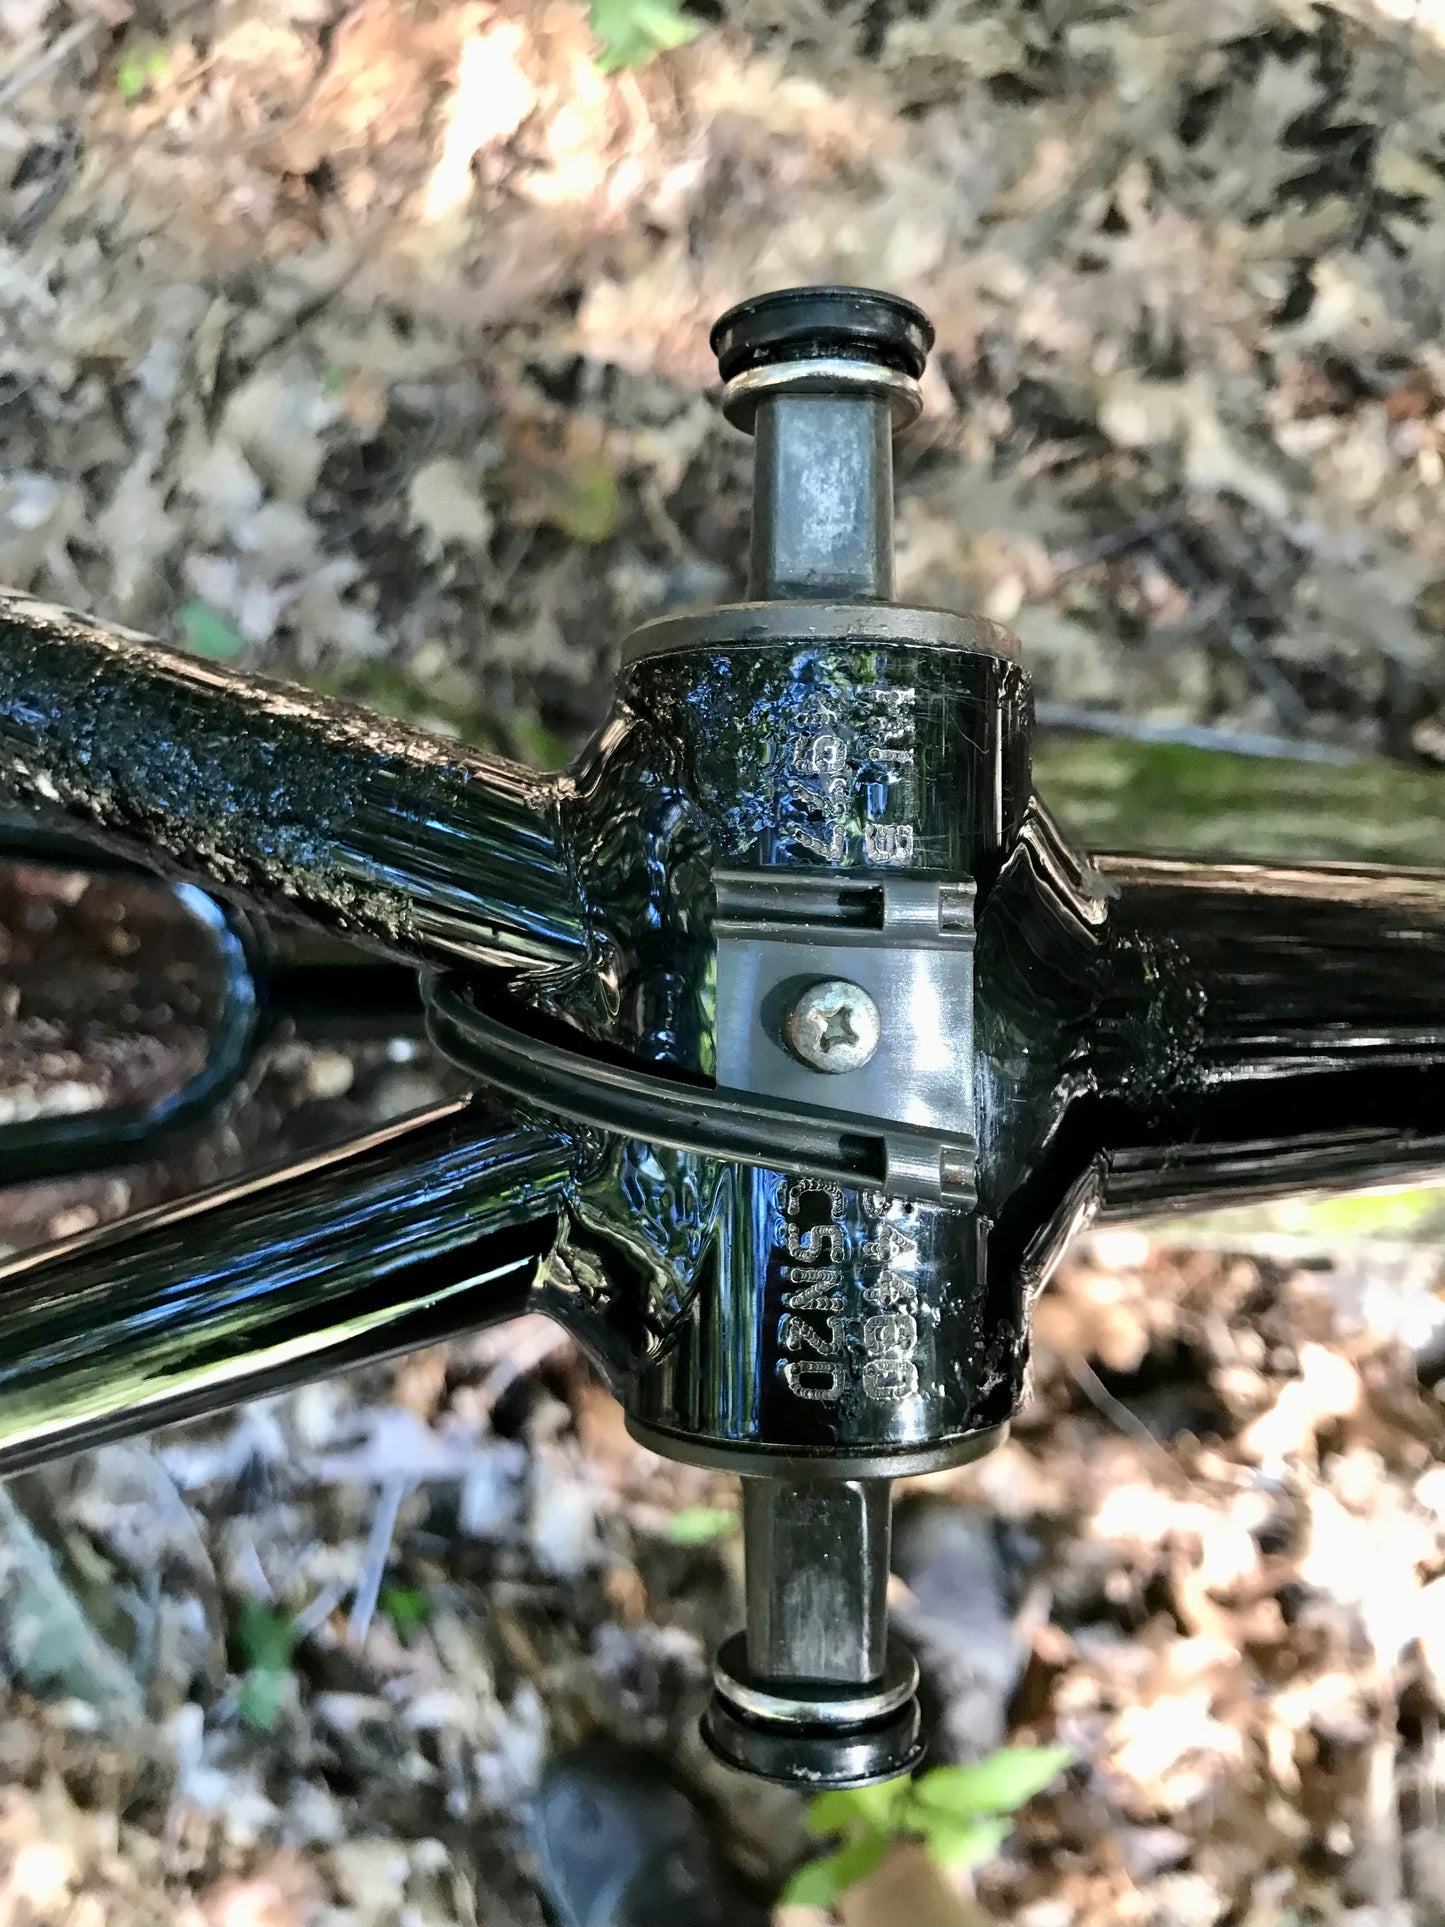 1997 Cannondale F300 Frame with Rock Show Quadra 5 Fork